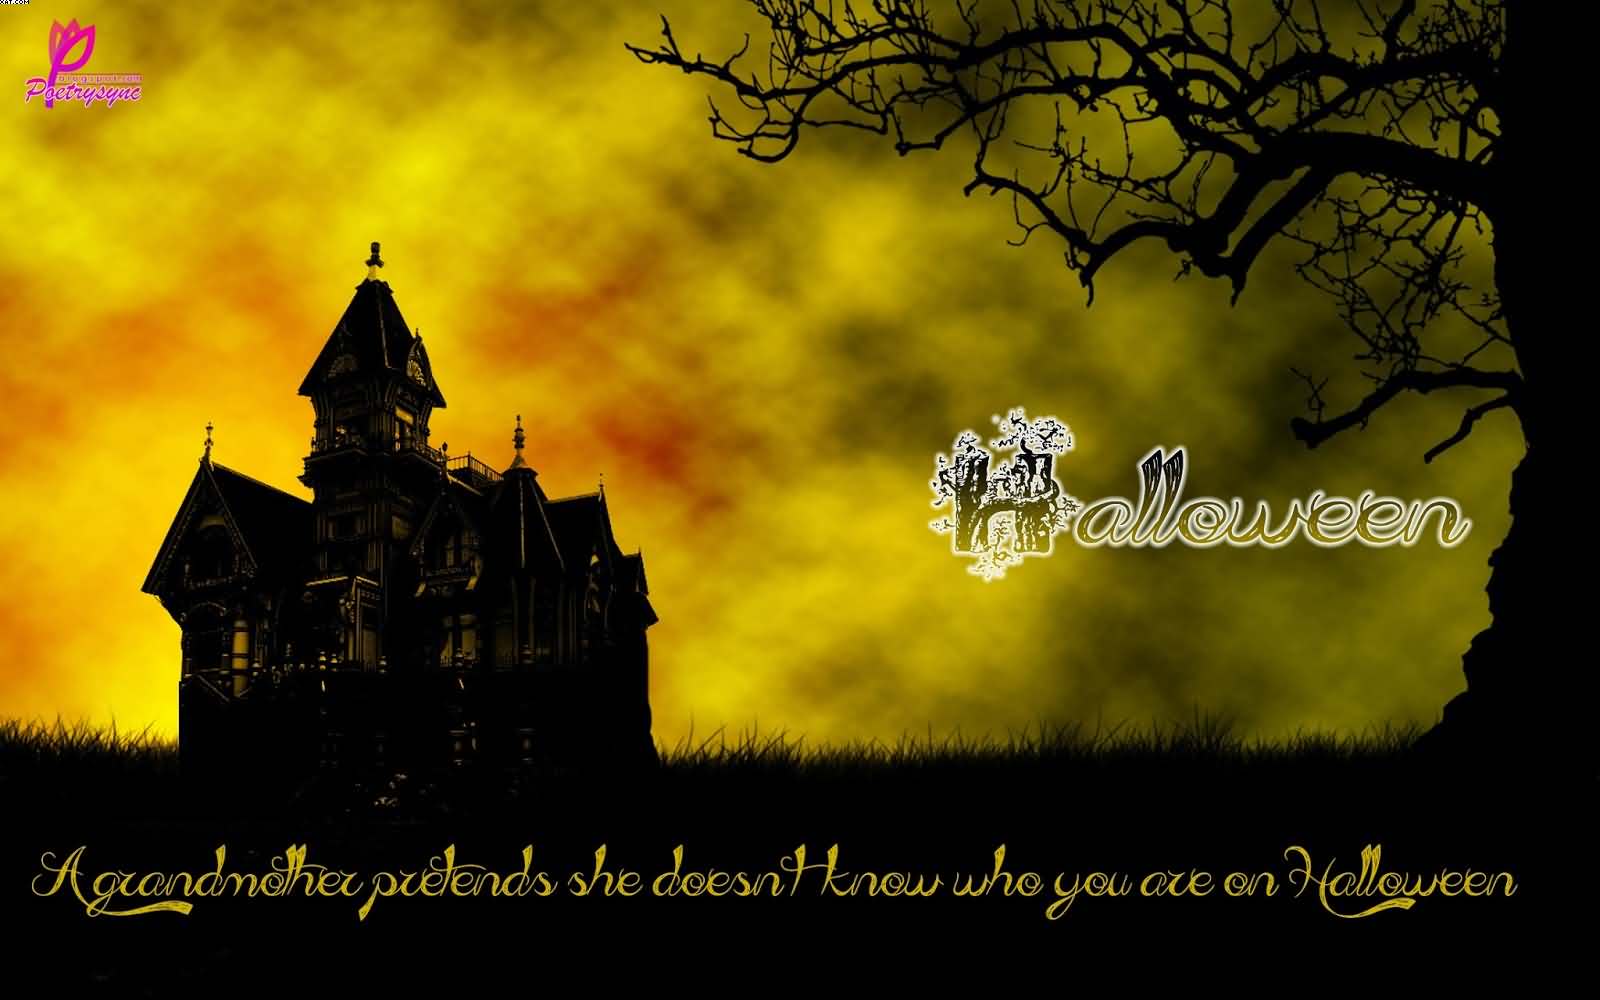 A grandmother pretends she doesn’t know who you are – Halloween wallpaper